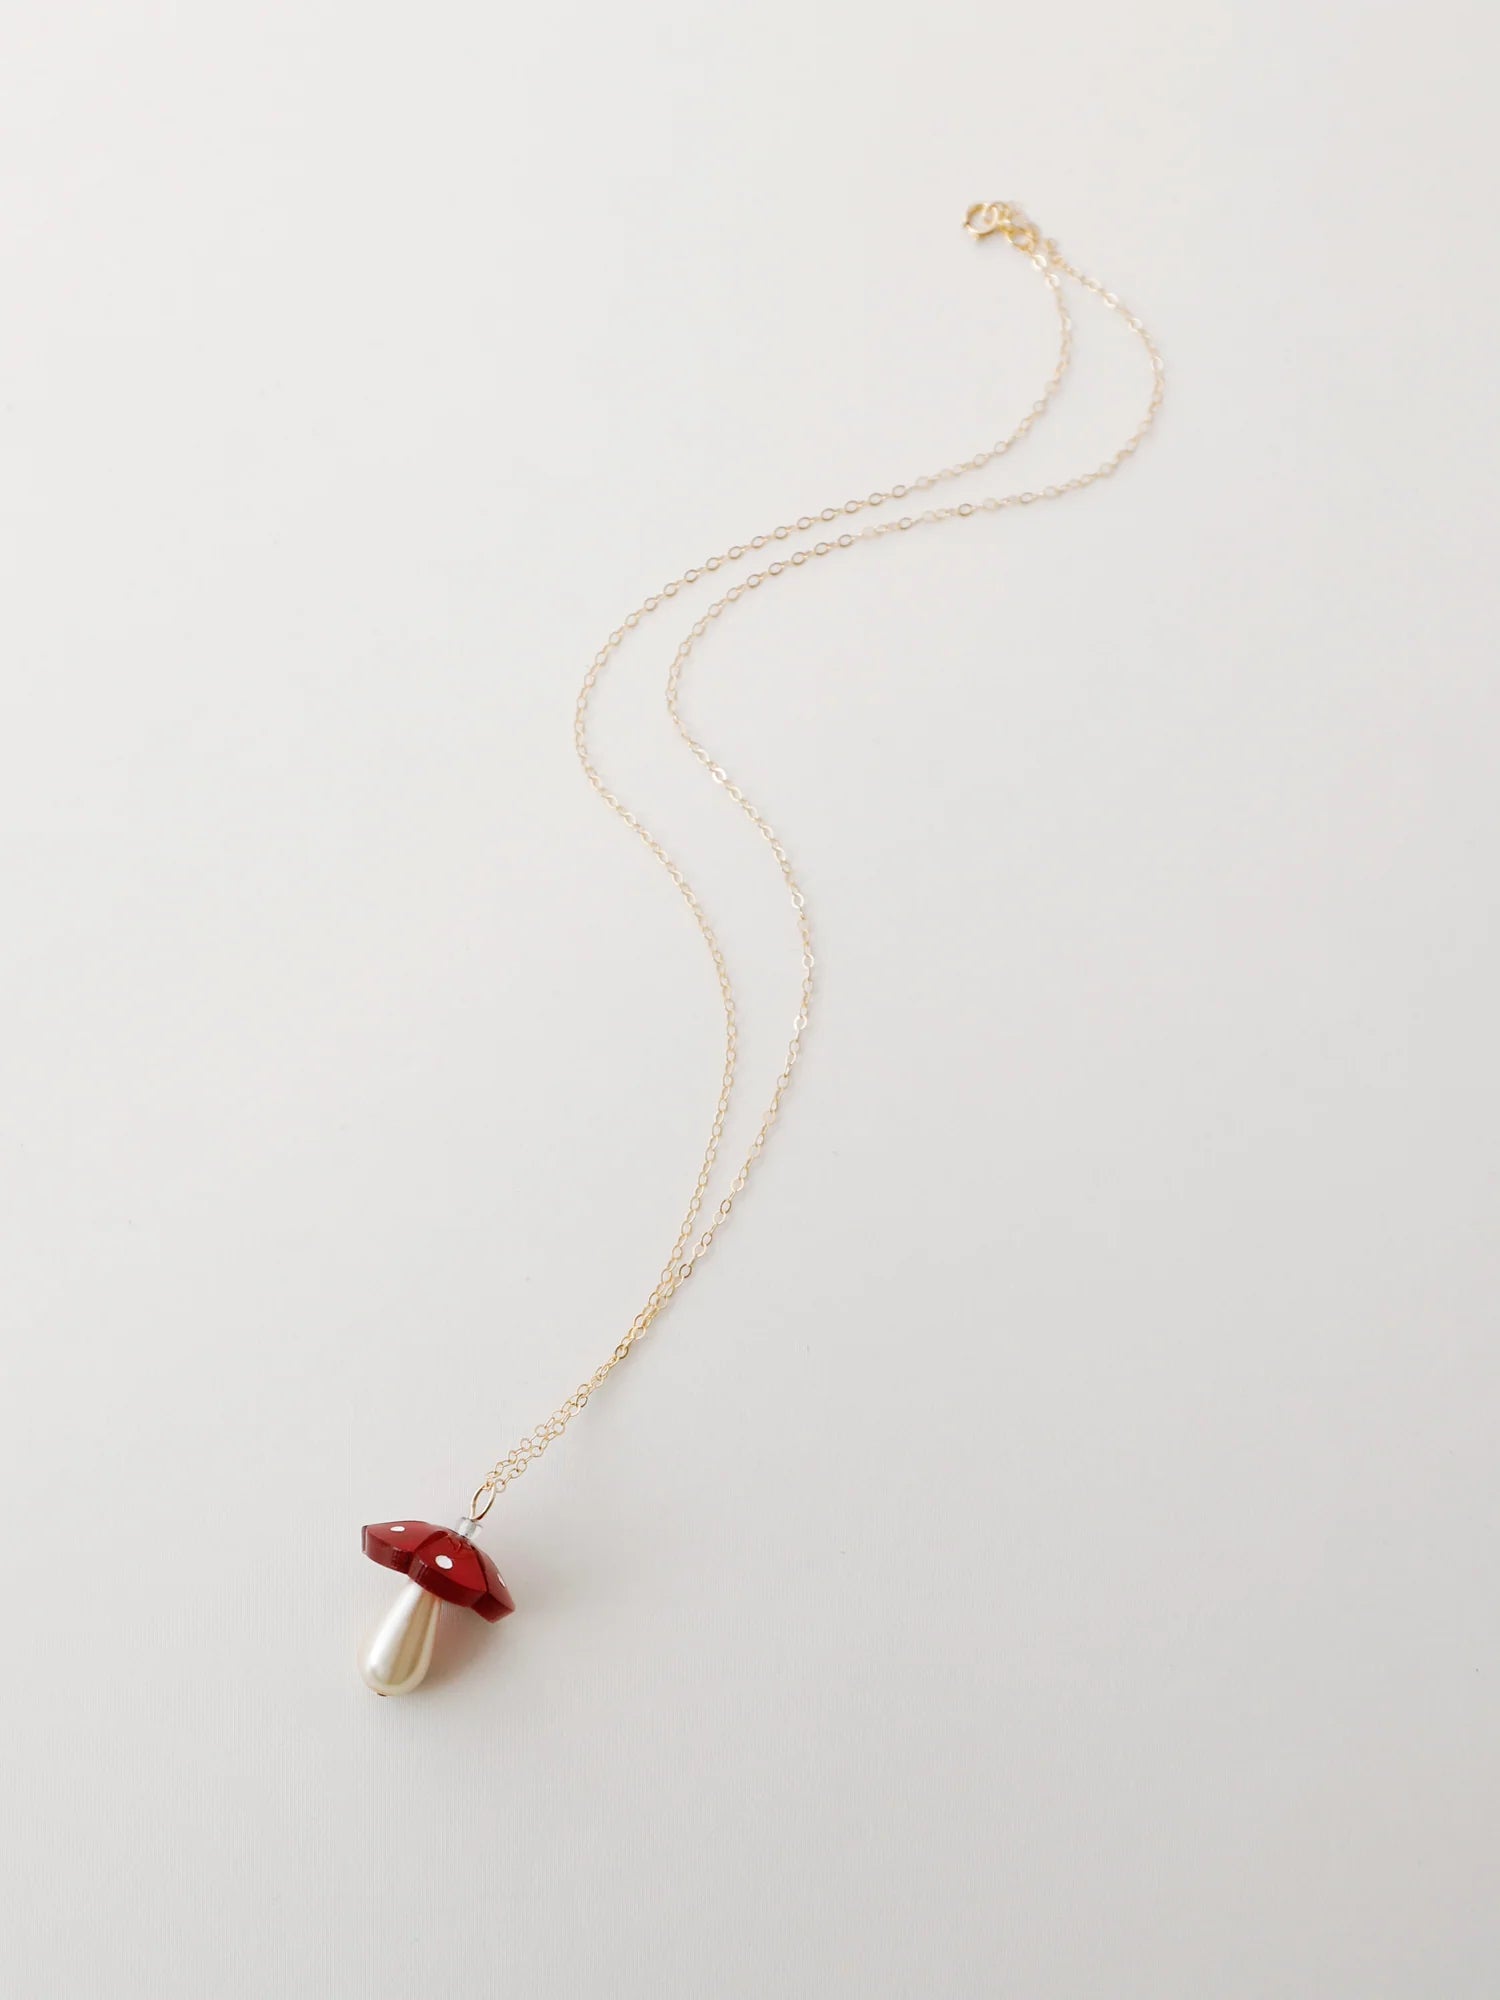 The Every Space Shroom necklace with gold filled chain and red marbled acrylic and glass pearly mushroom pendant by Wolf & Moon